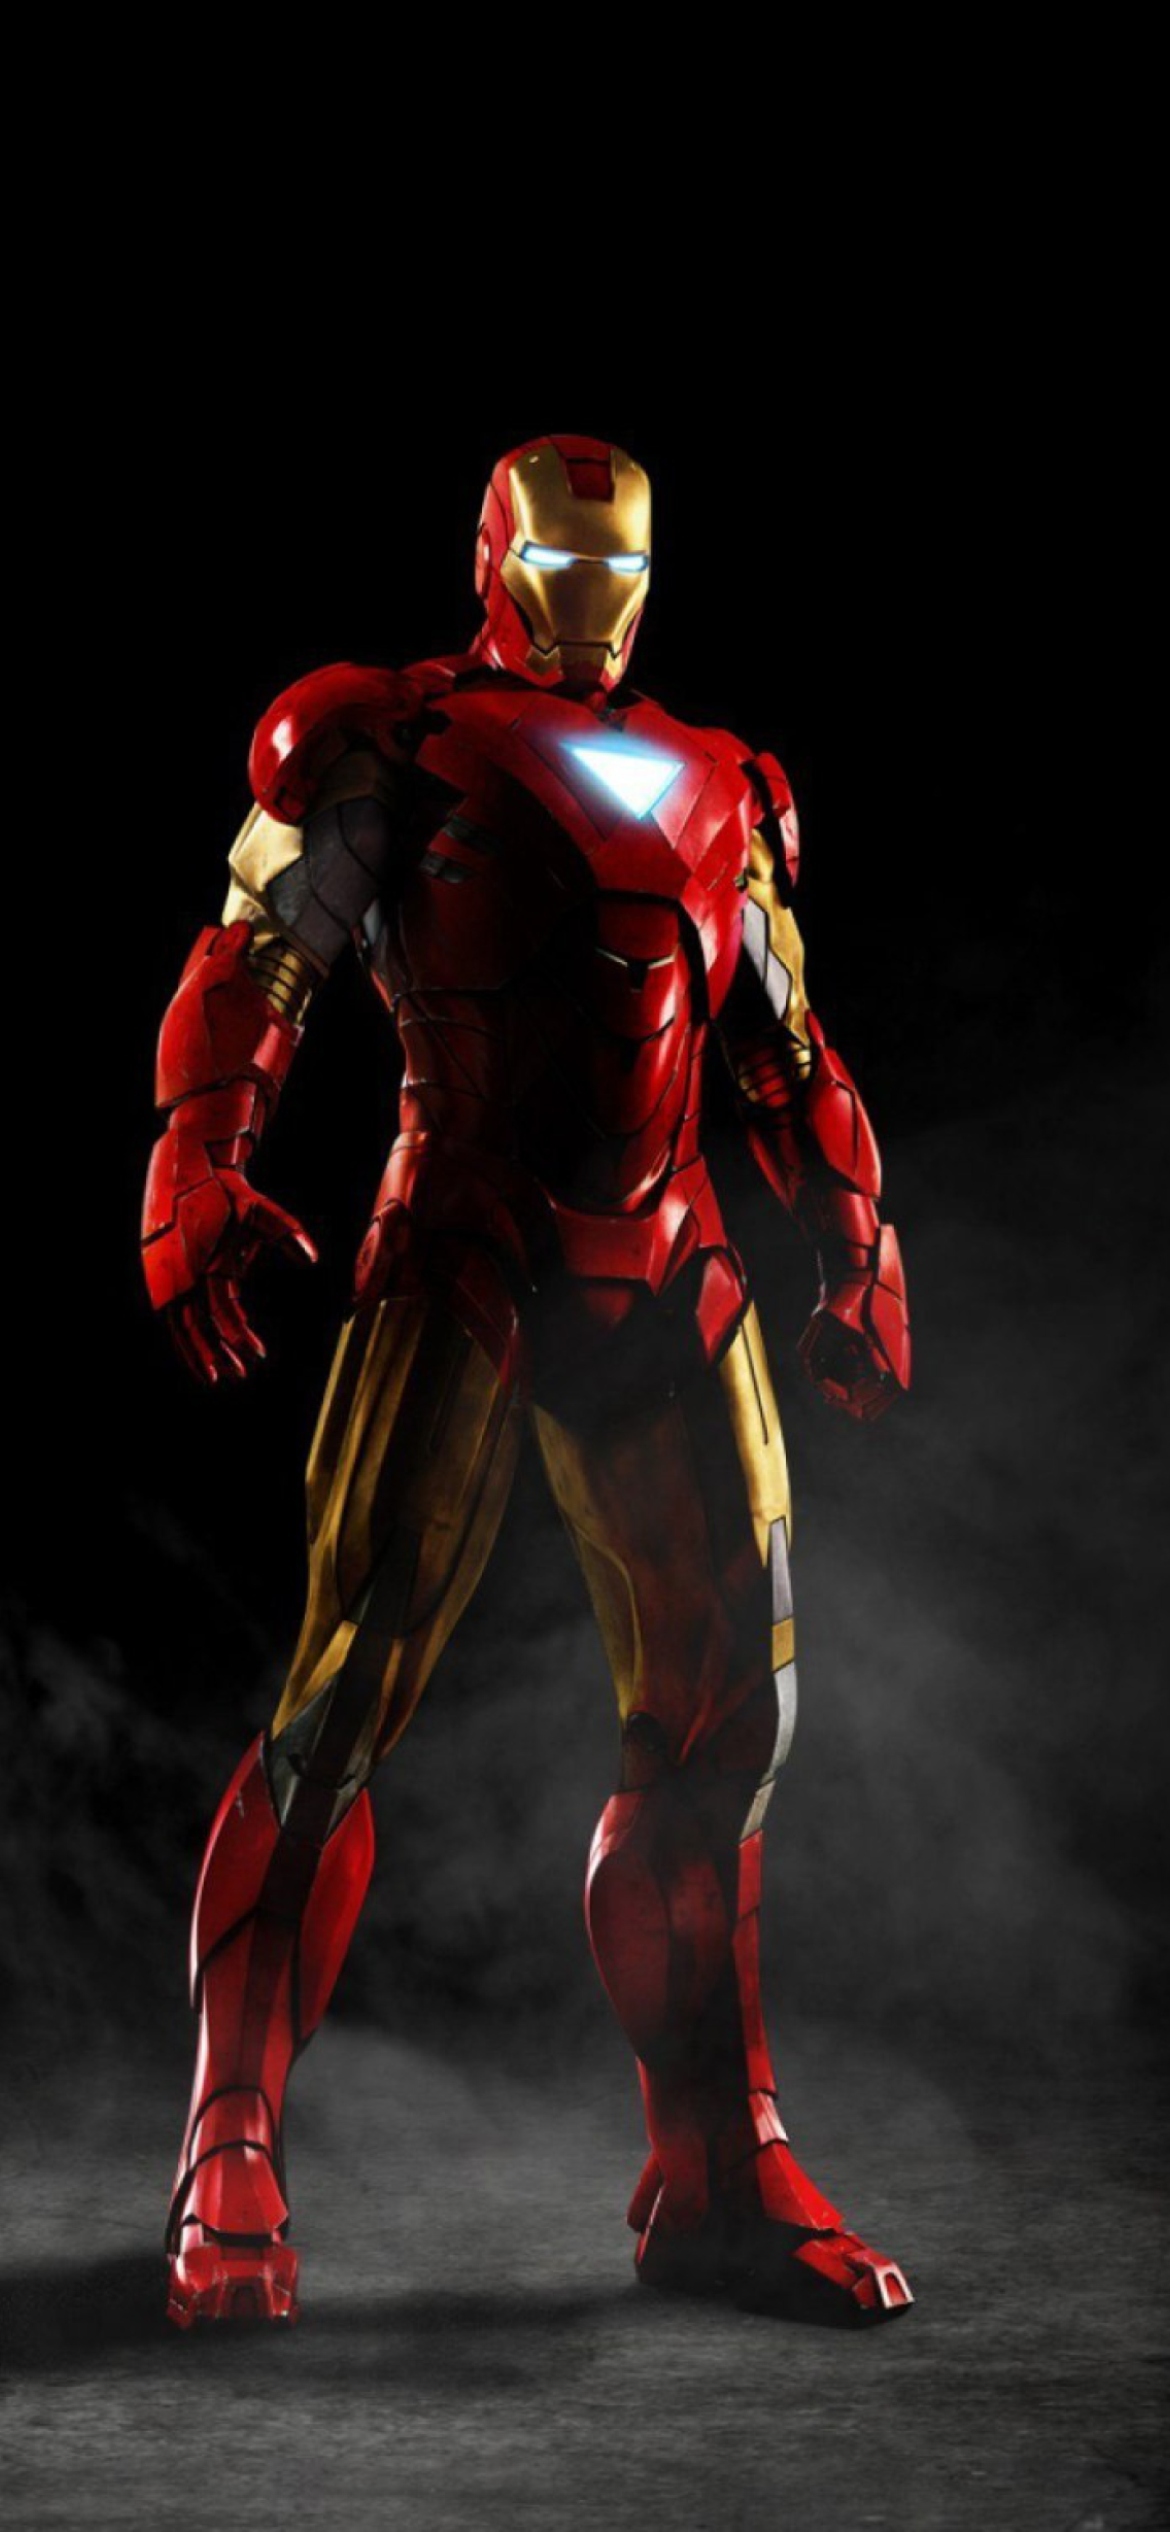 Iron Man Wallpaper for iPhone 11